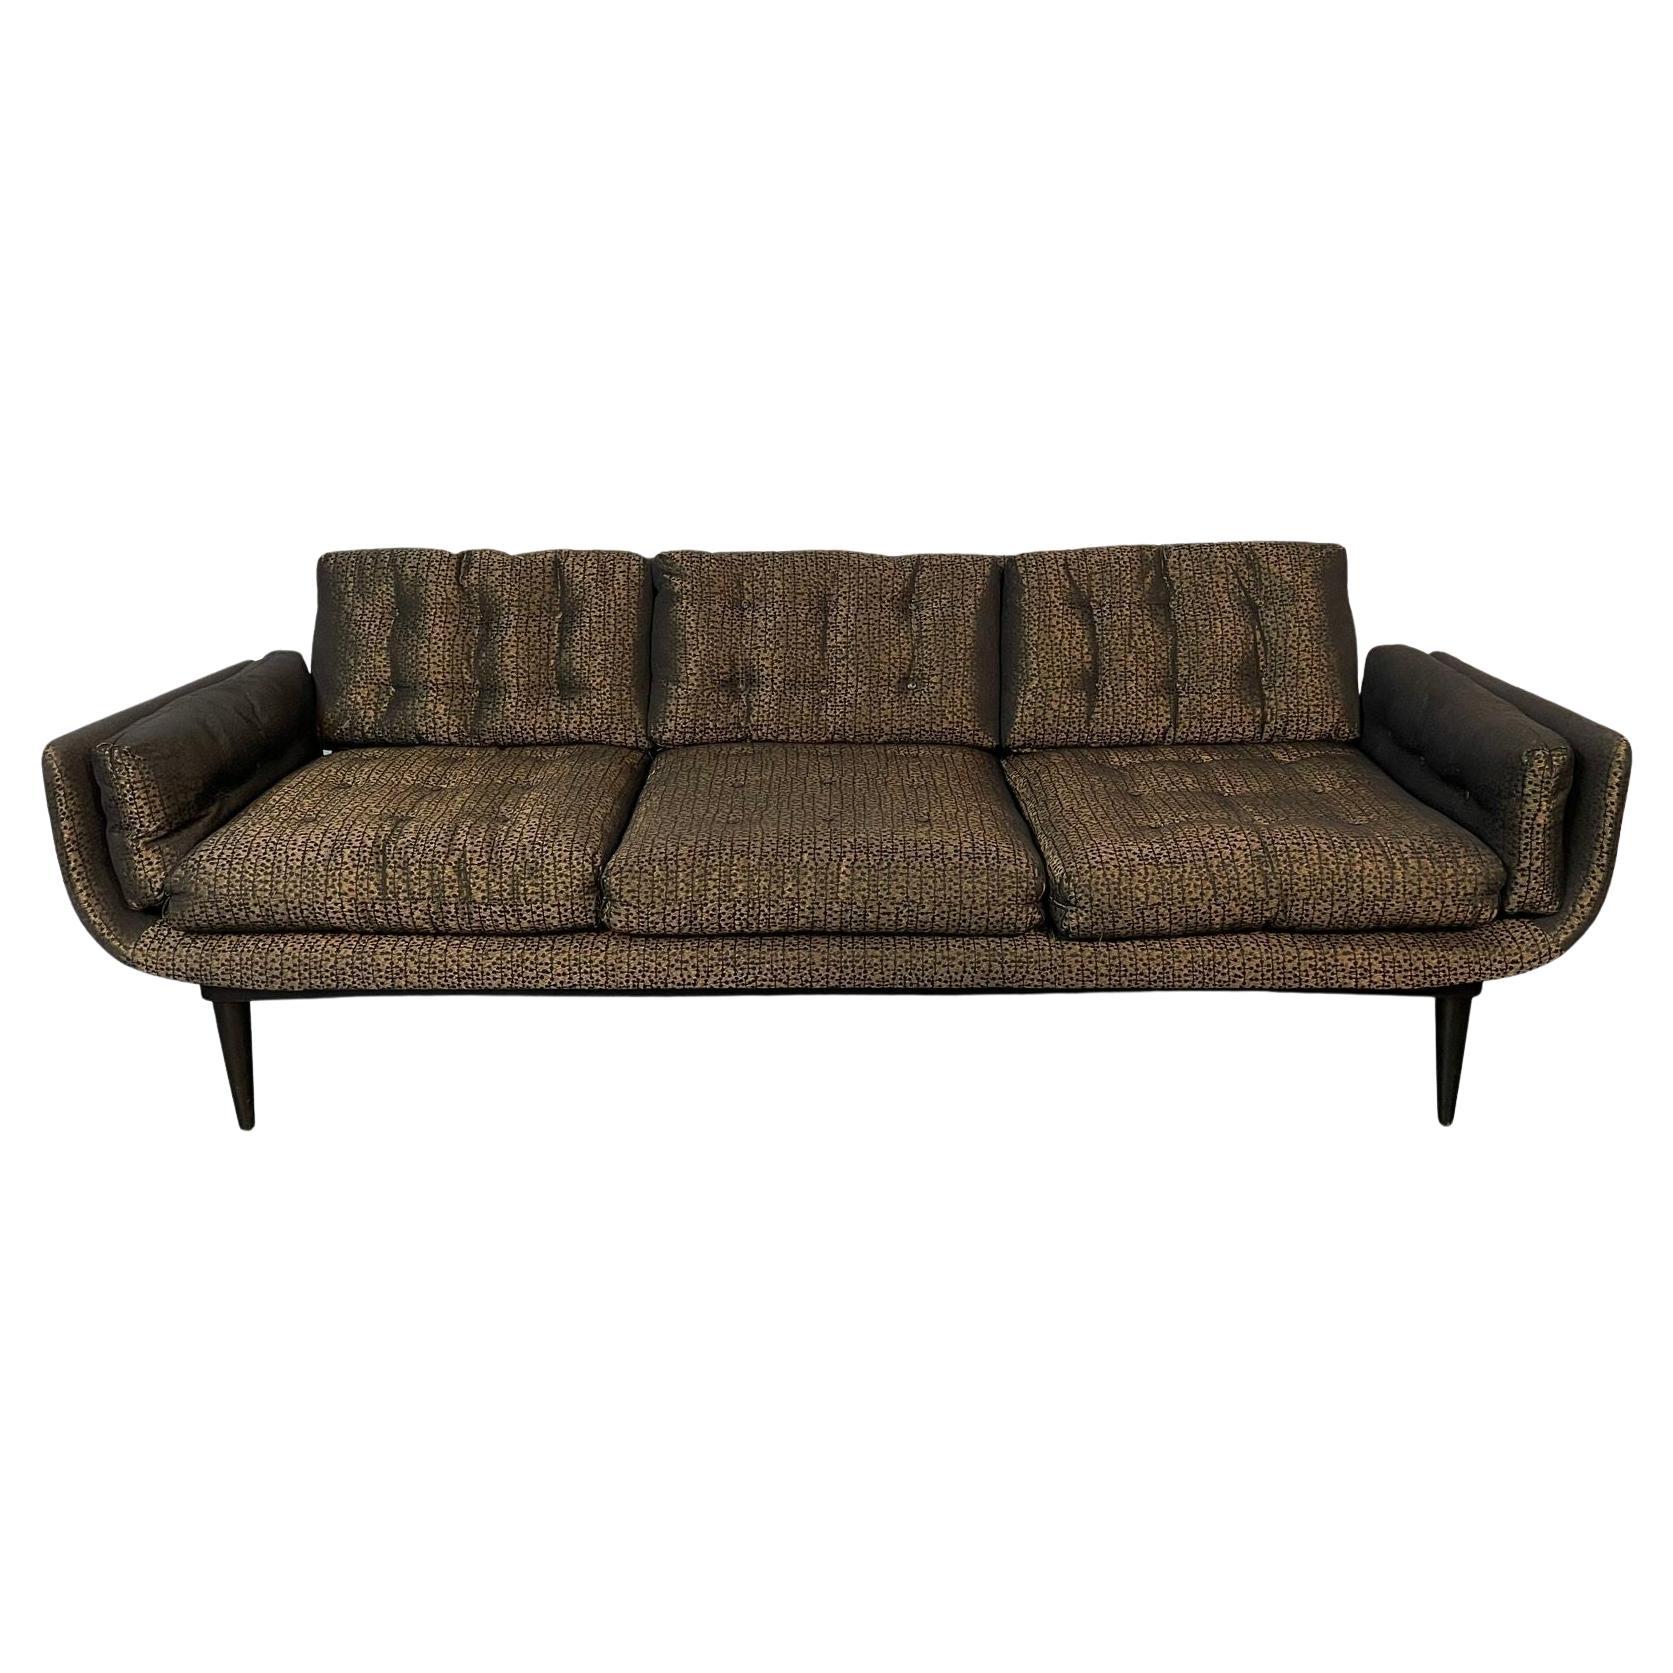 Mid-Century Modern Curved Sofa / Settee, Adrian Pearsall Style, Three-Seater For Sale